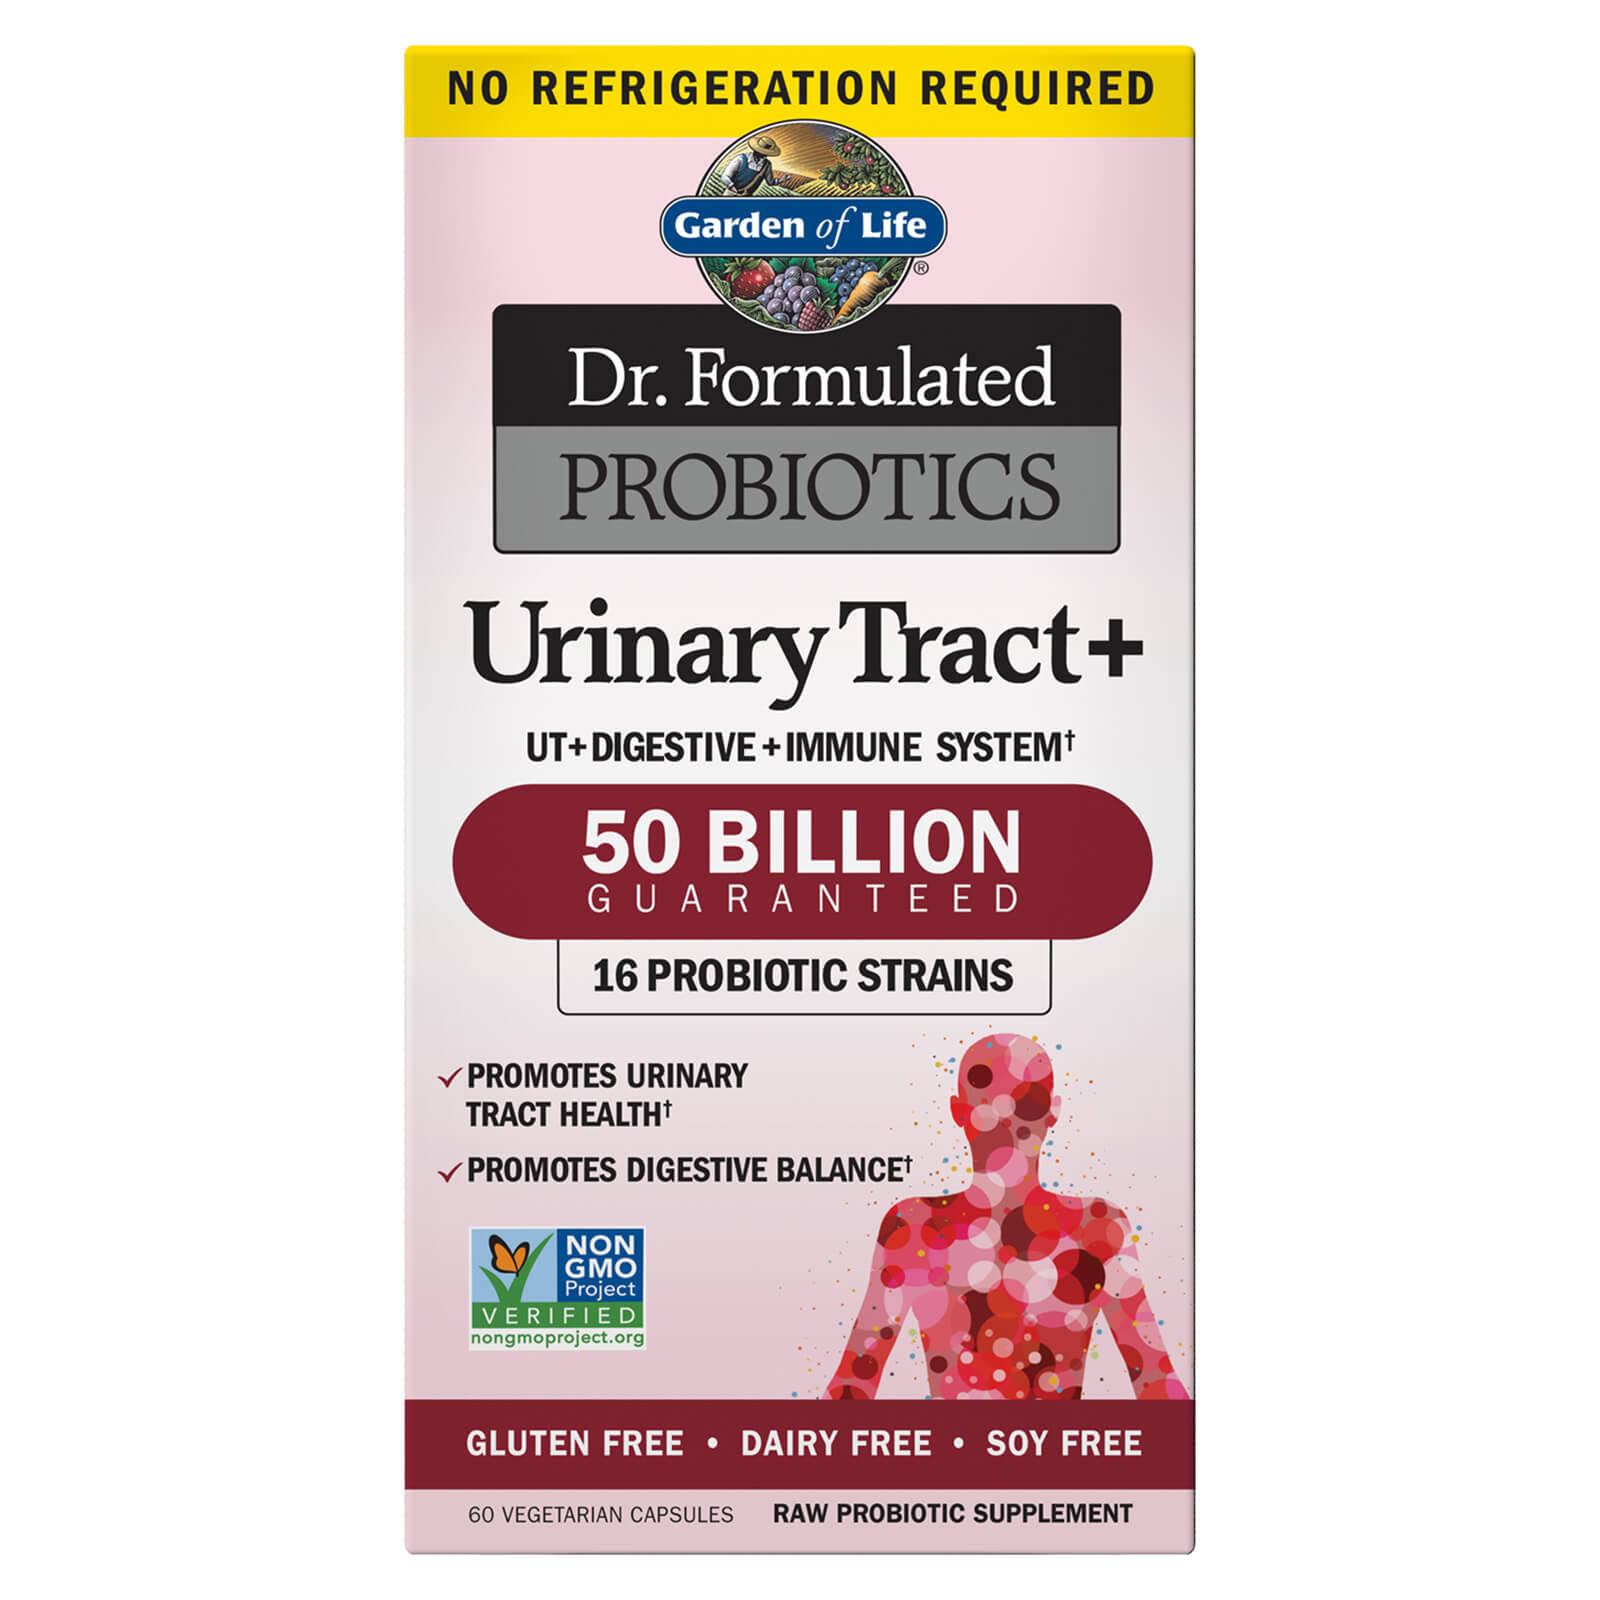 Garden of Life Dr. Formulated Probiotics Urinary Tract Plus Supplement - 60ct